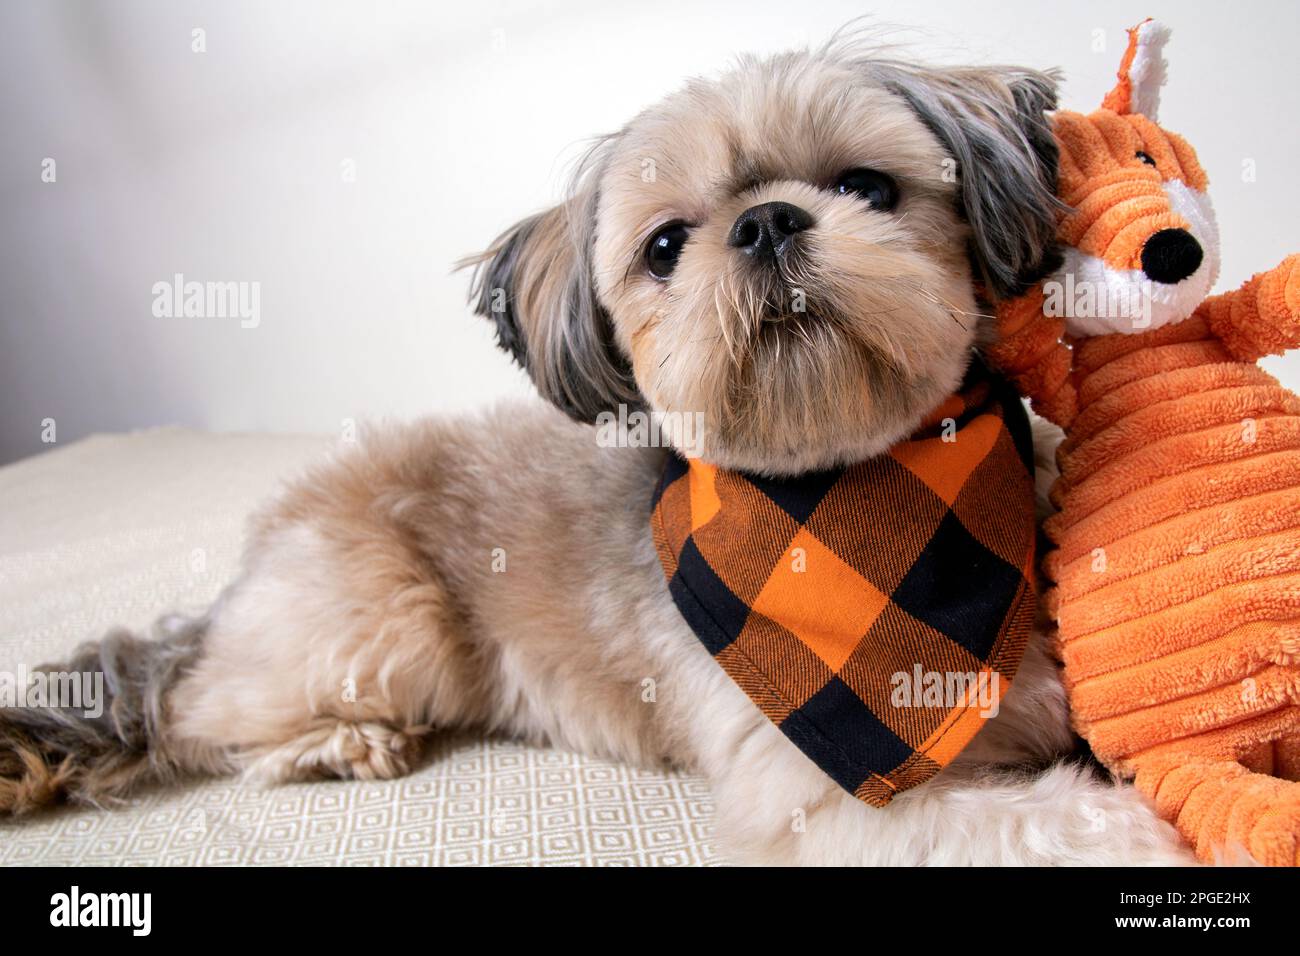 https://c8.alamy.com/comp/2PGE2HX/photo-shih-tzu-a-small-breed-of-dog-and-a-toy-on-the-couch-2PGE2HX.jpg